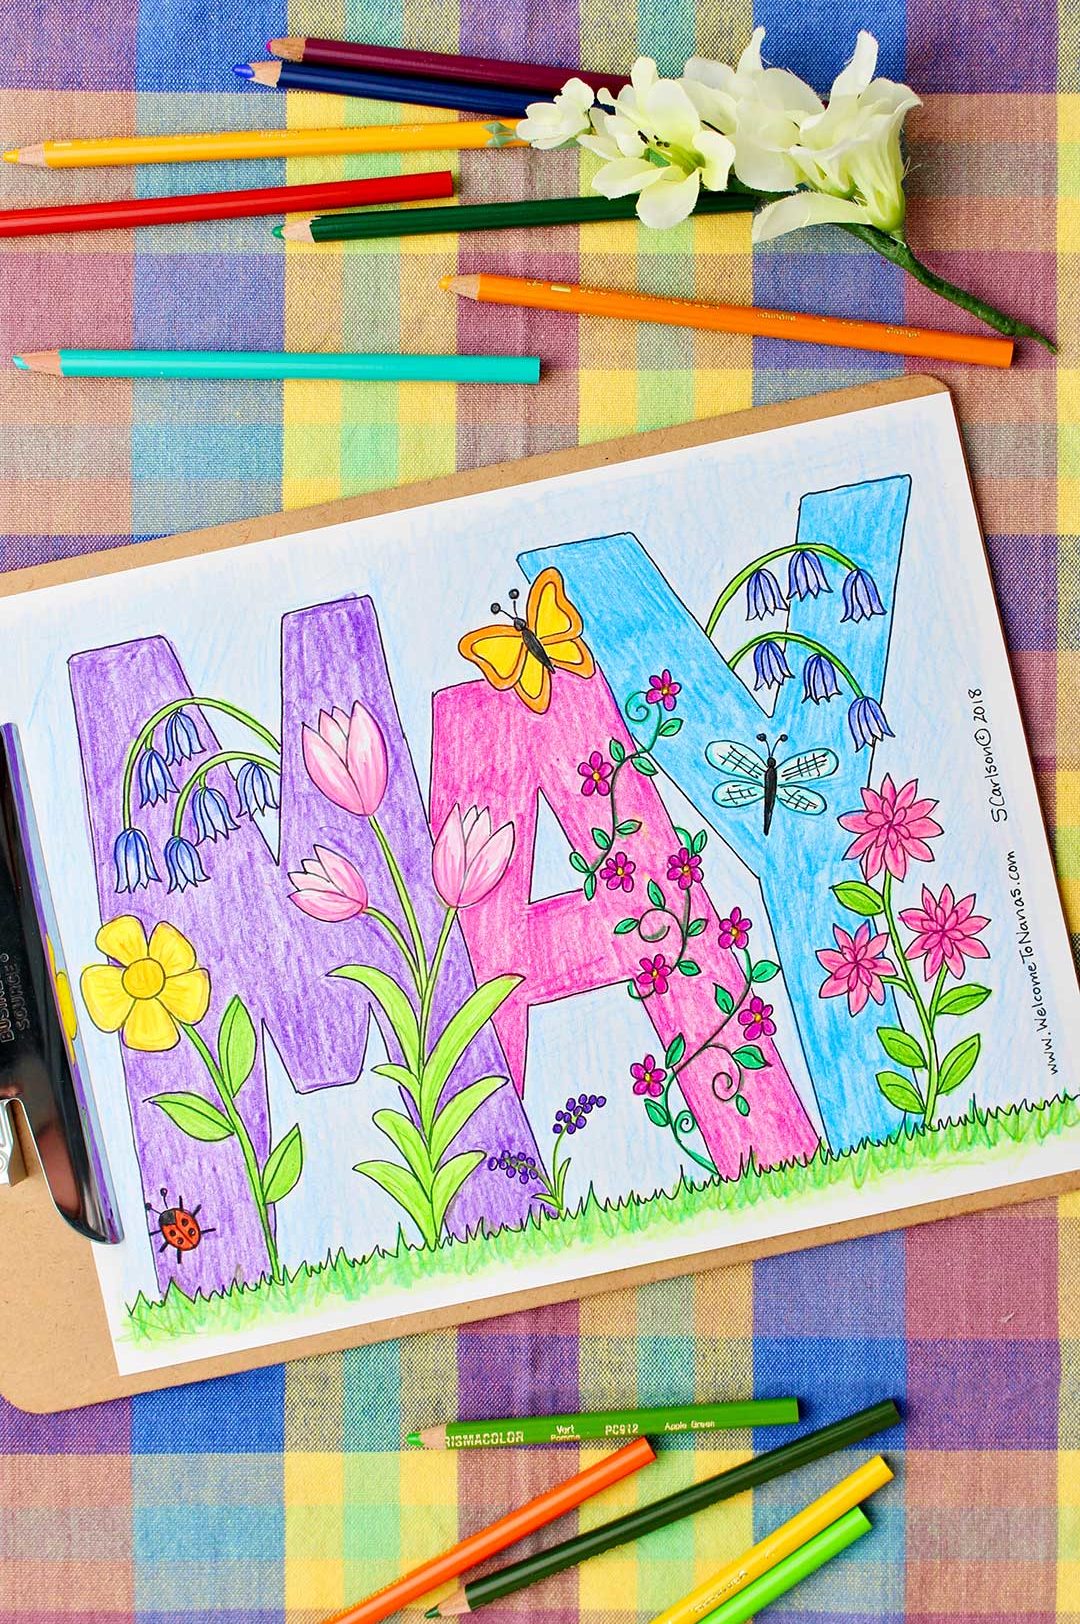 Completed May Coloring Page on a clipboard and colored pencils and flower resting on colorful plaid background.